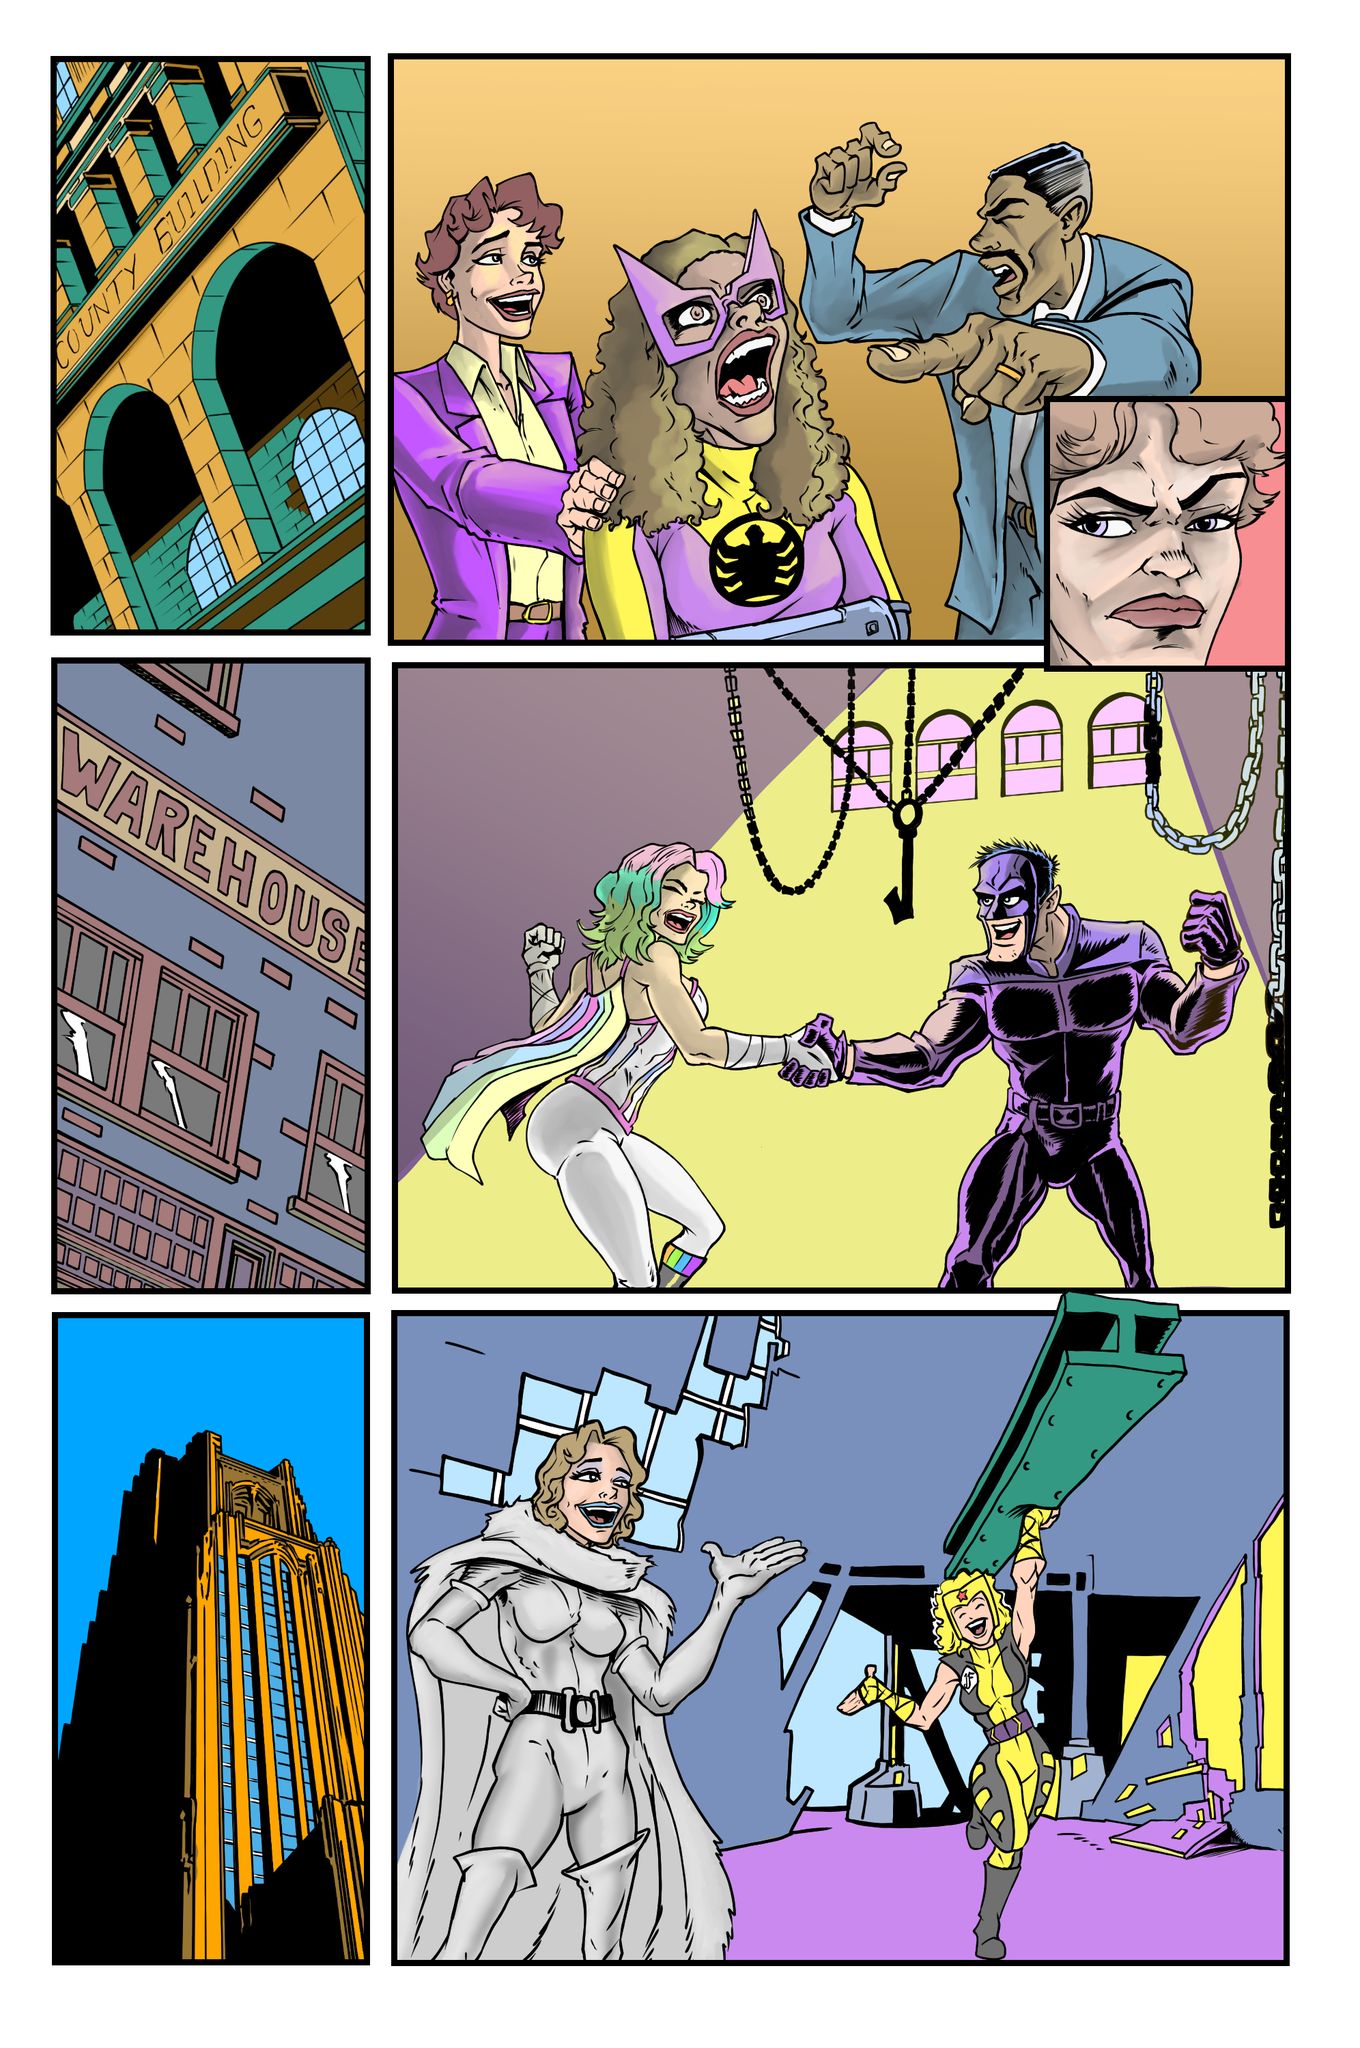 Issue 4 Wayne page 16 art almost done.jpg